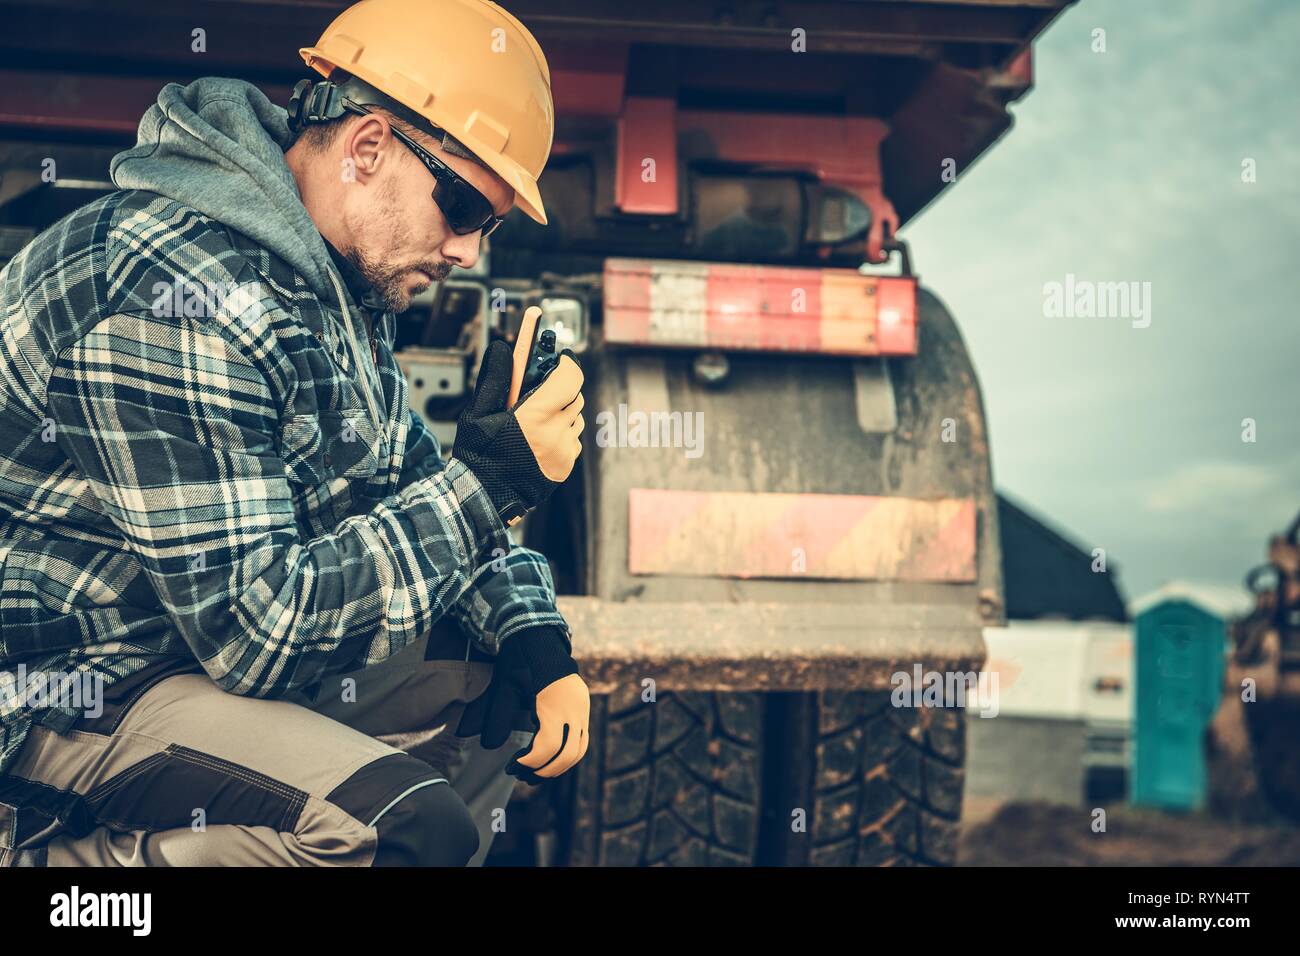 Caucasian Construction Site Worker in Hard Hat and Sunglasses with Walkie Talkie Taking Conversation with Other Building Crew Member. Dump Truck in th Stock Photo